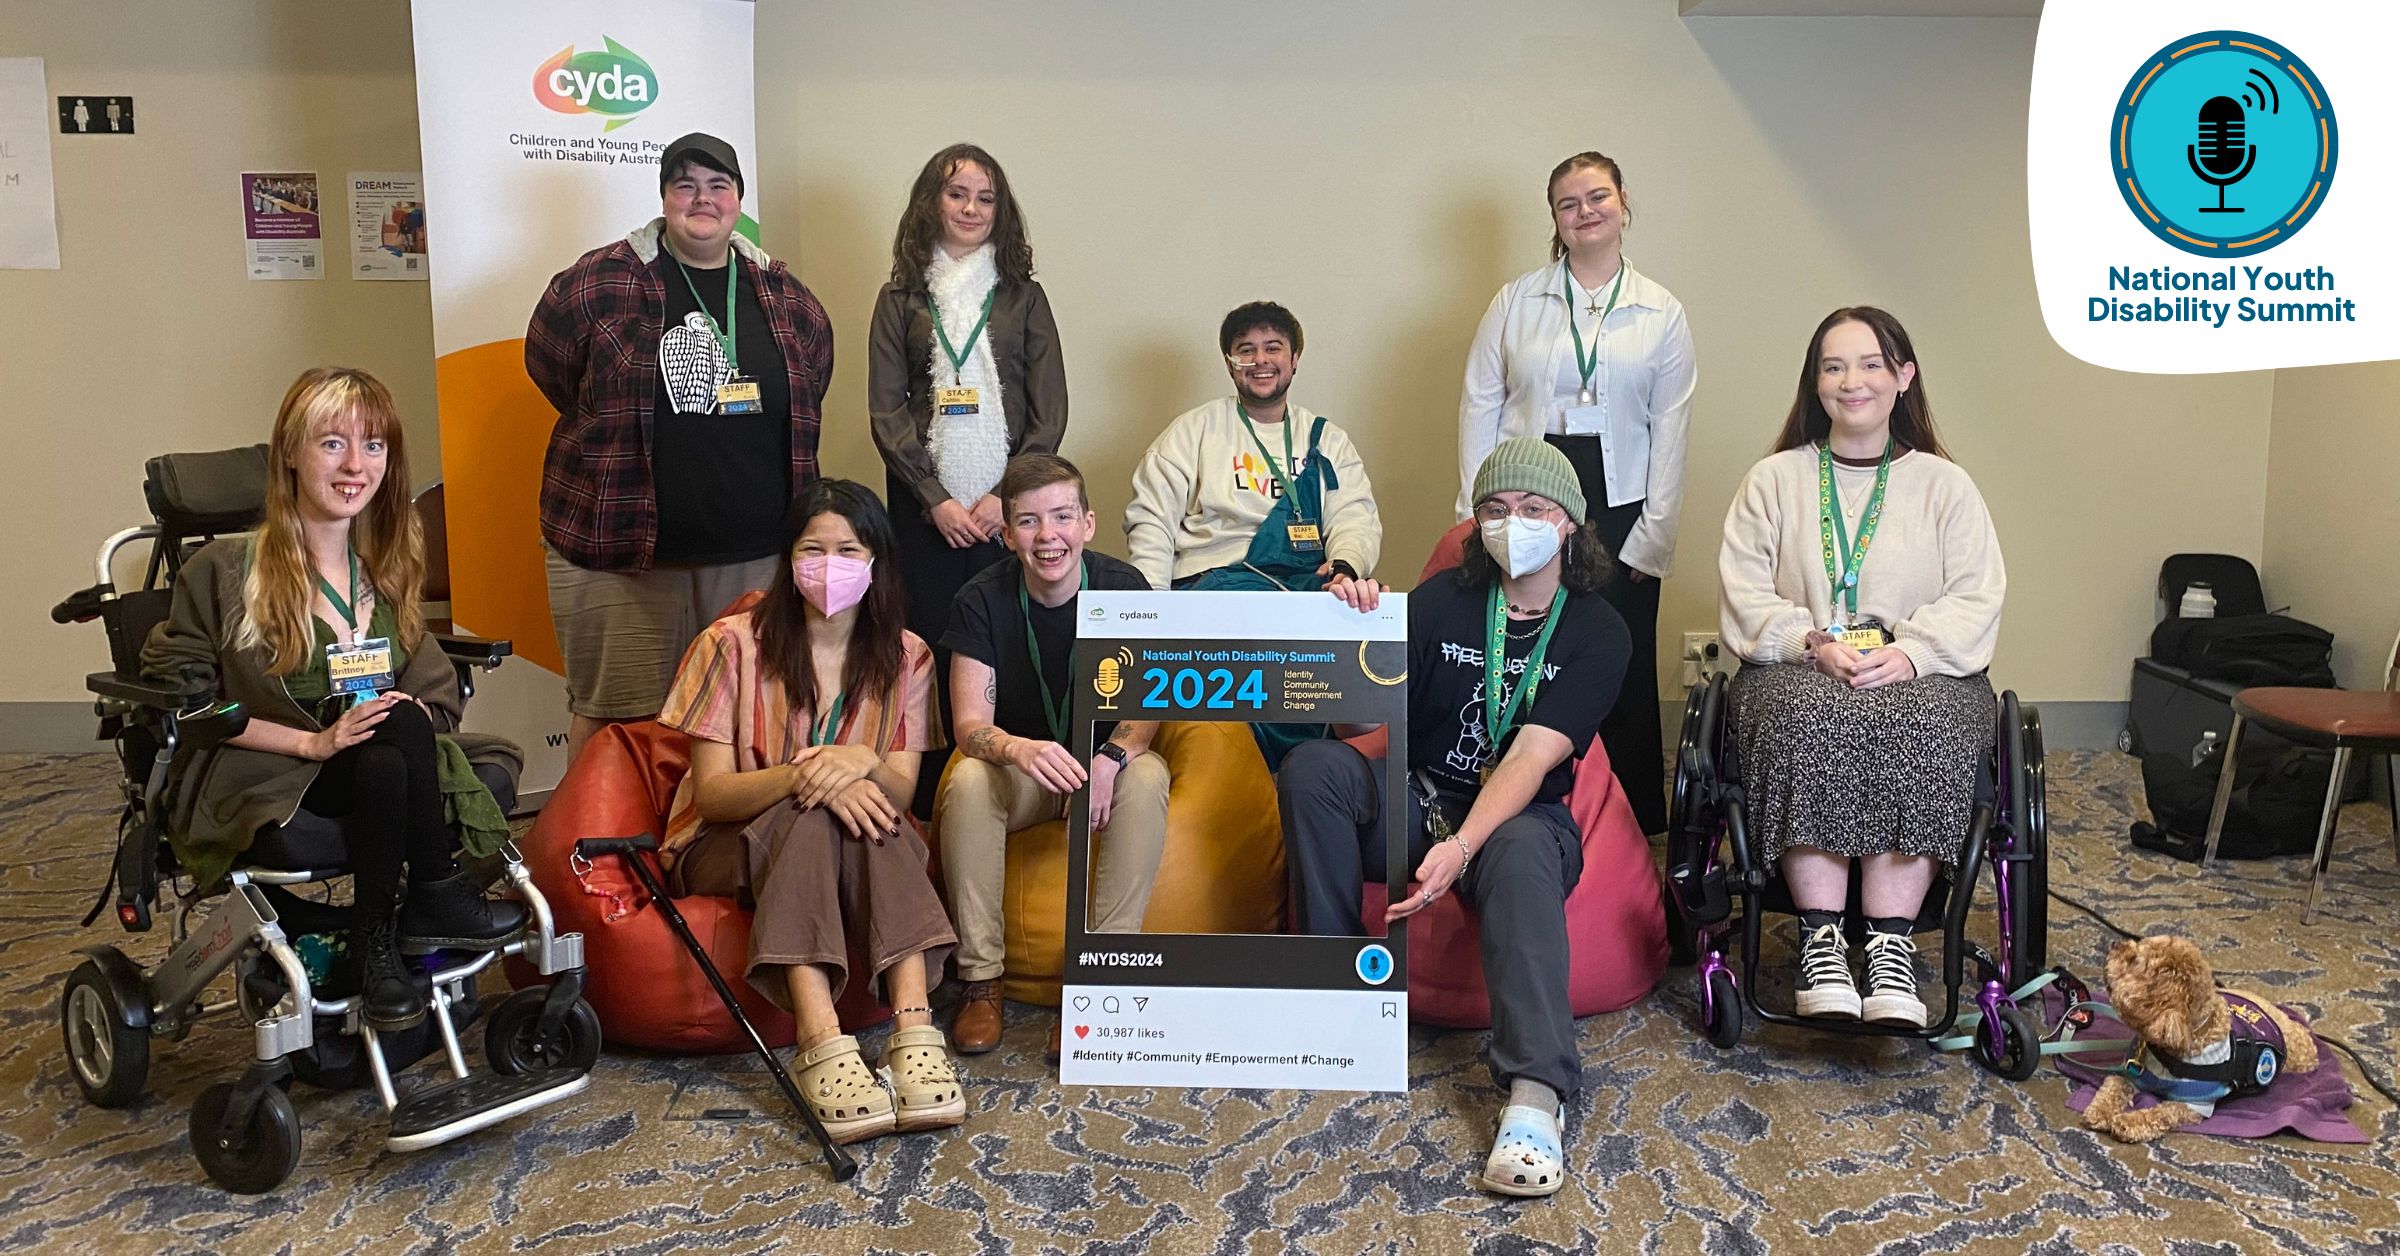 A photo of some of CYDA’s Youth Council in a well-lit room in front of a green, orange and white banner featuring the CYDA logo. Three people at the front of the group, including Ezra on the right, are sitting on colourful beanbags. Ezra and another young person are holding a cardboard cutout made to look like an Instagram post with the text “National Youth Disability Summit 2024.” The Summit's logo sits top right.